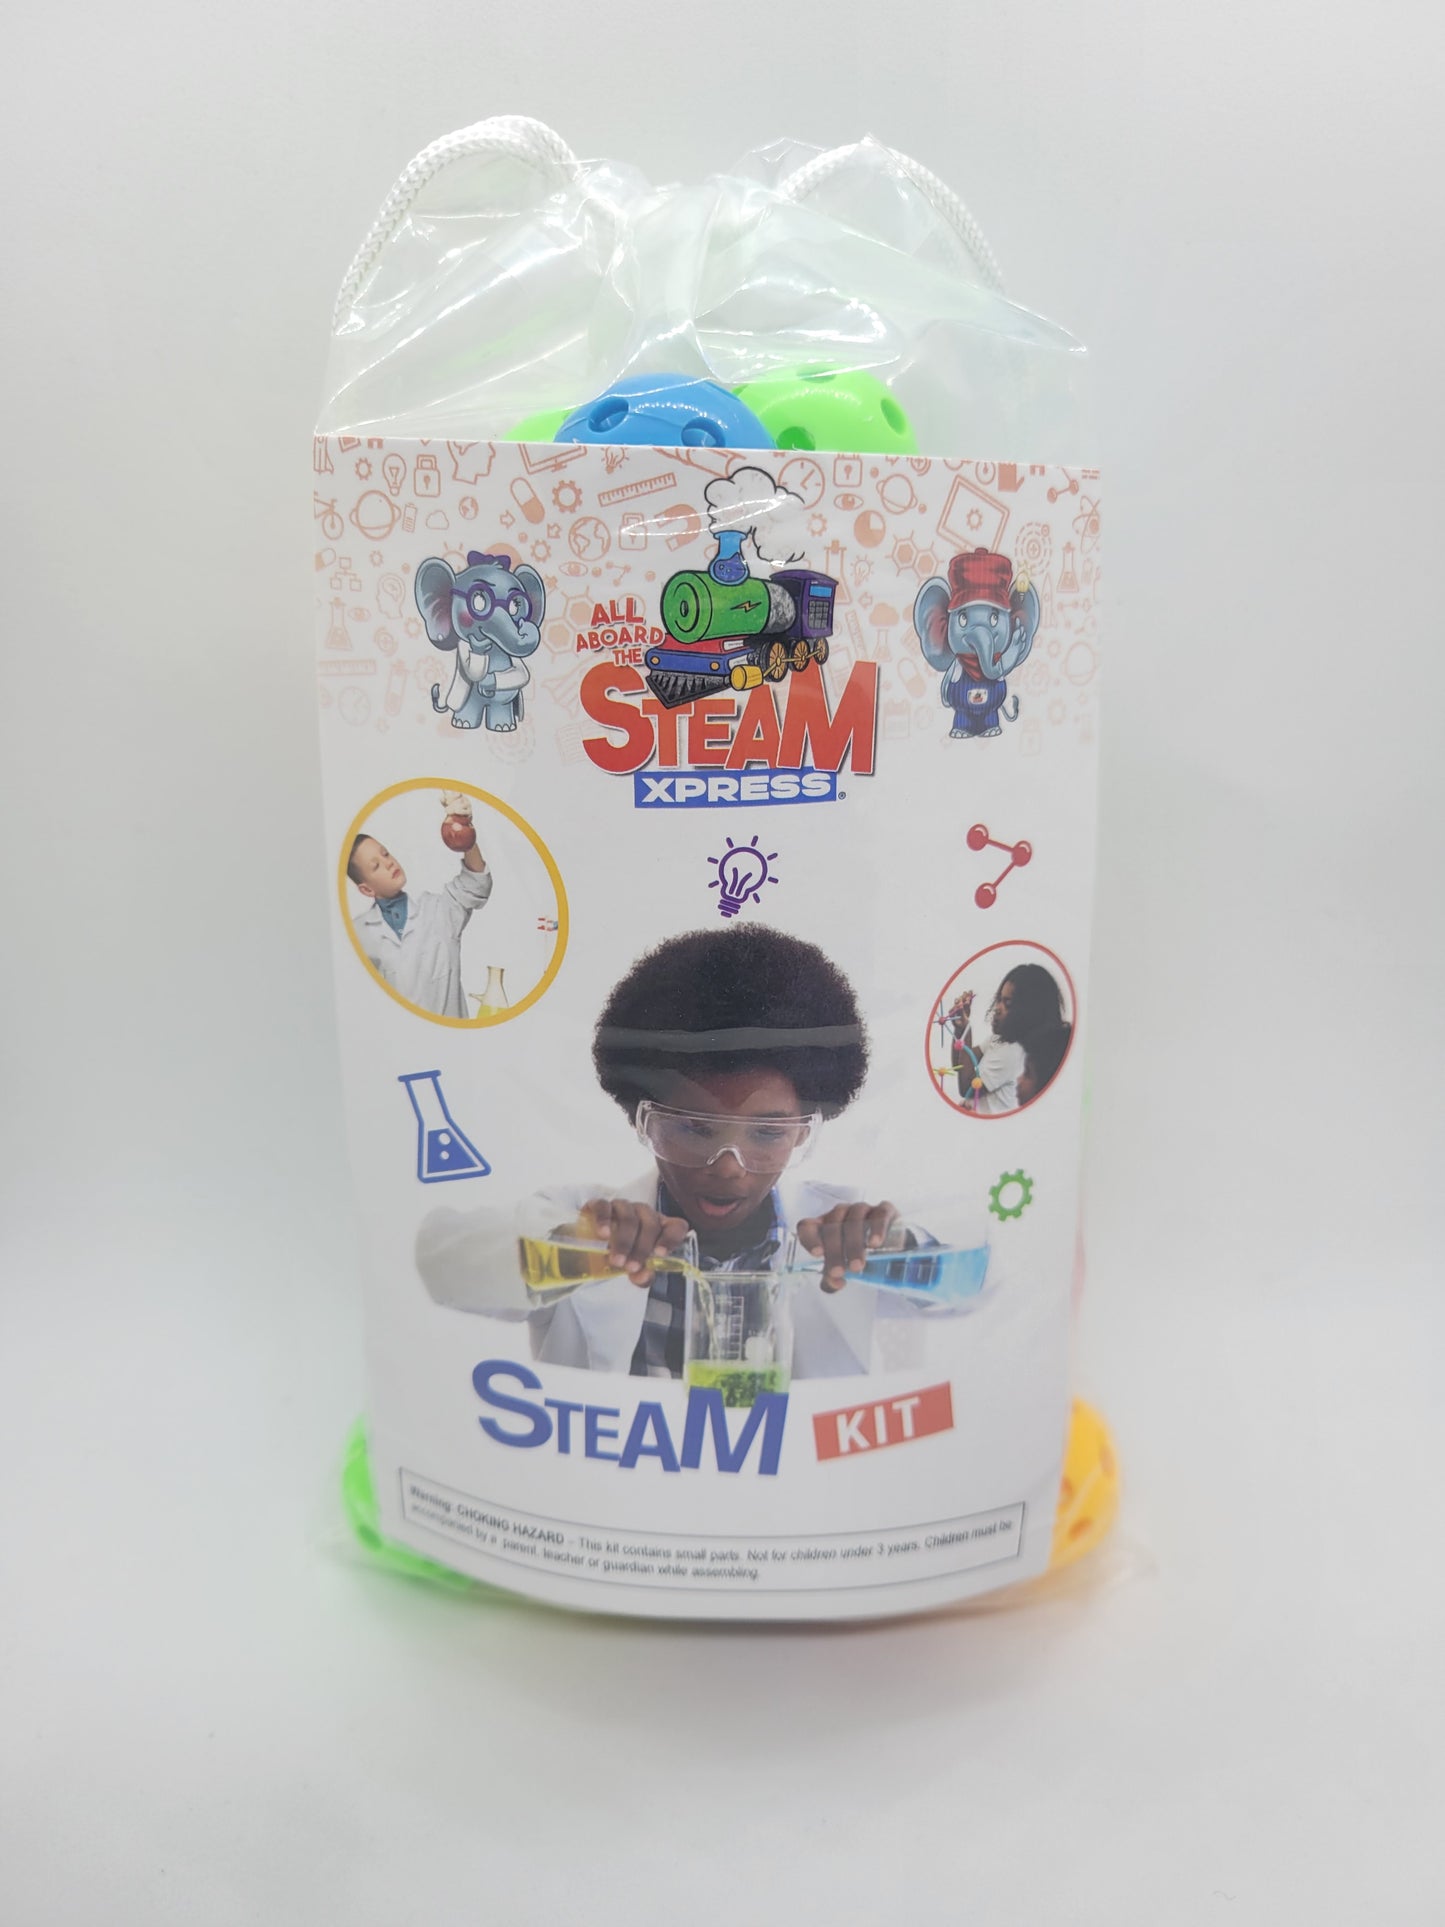 All Aboard the STEAM XPRESS® Engineering Shapes XPLORER’S BOX